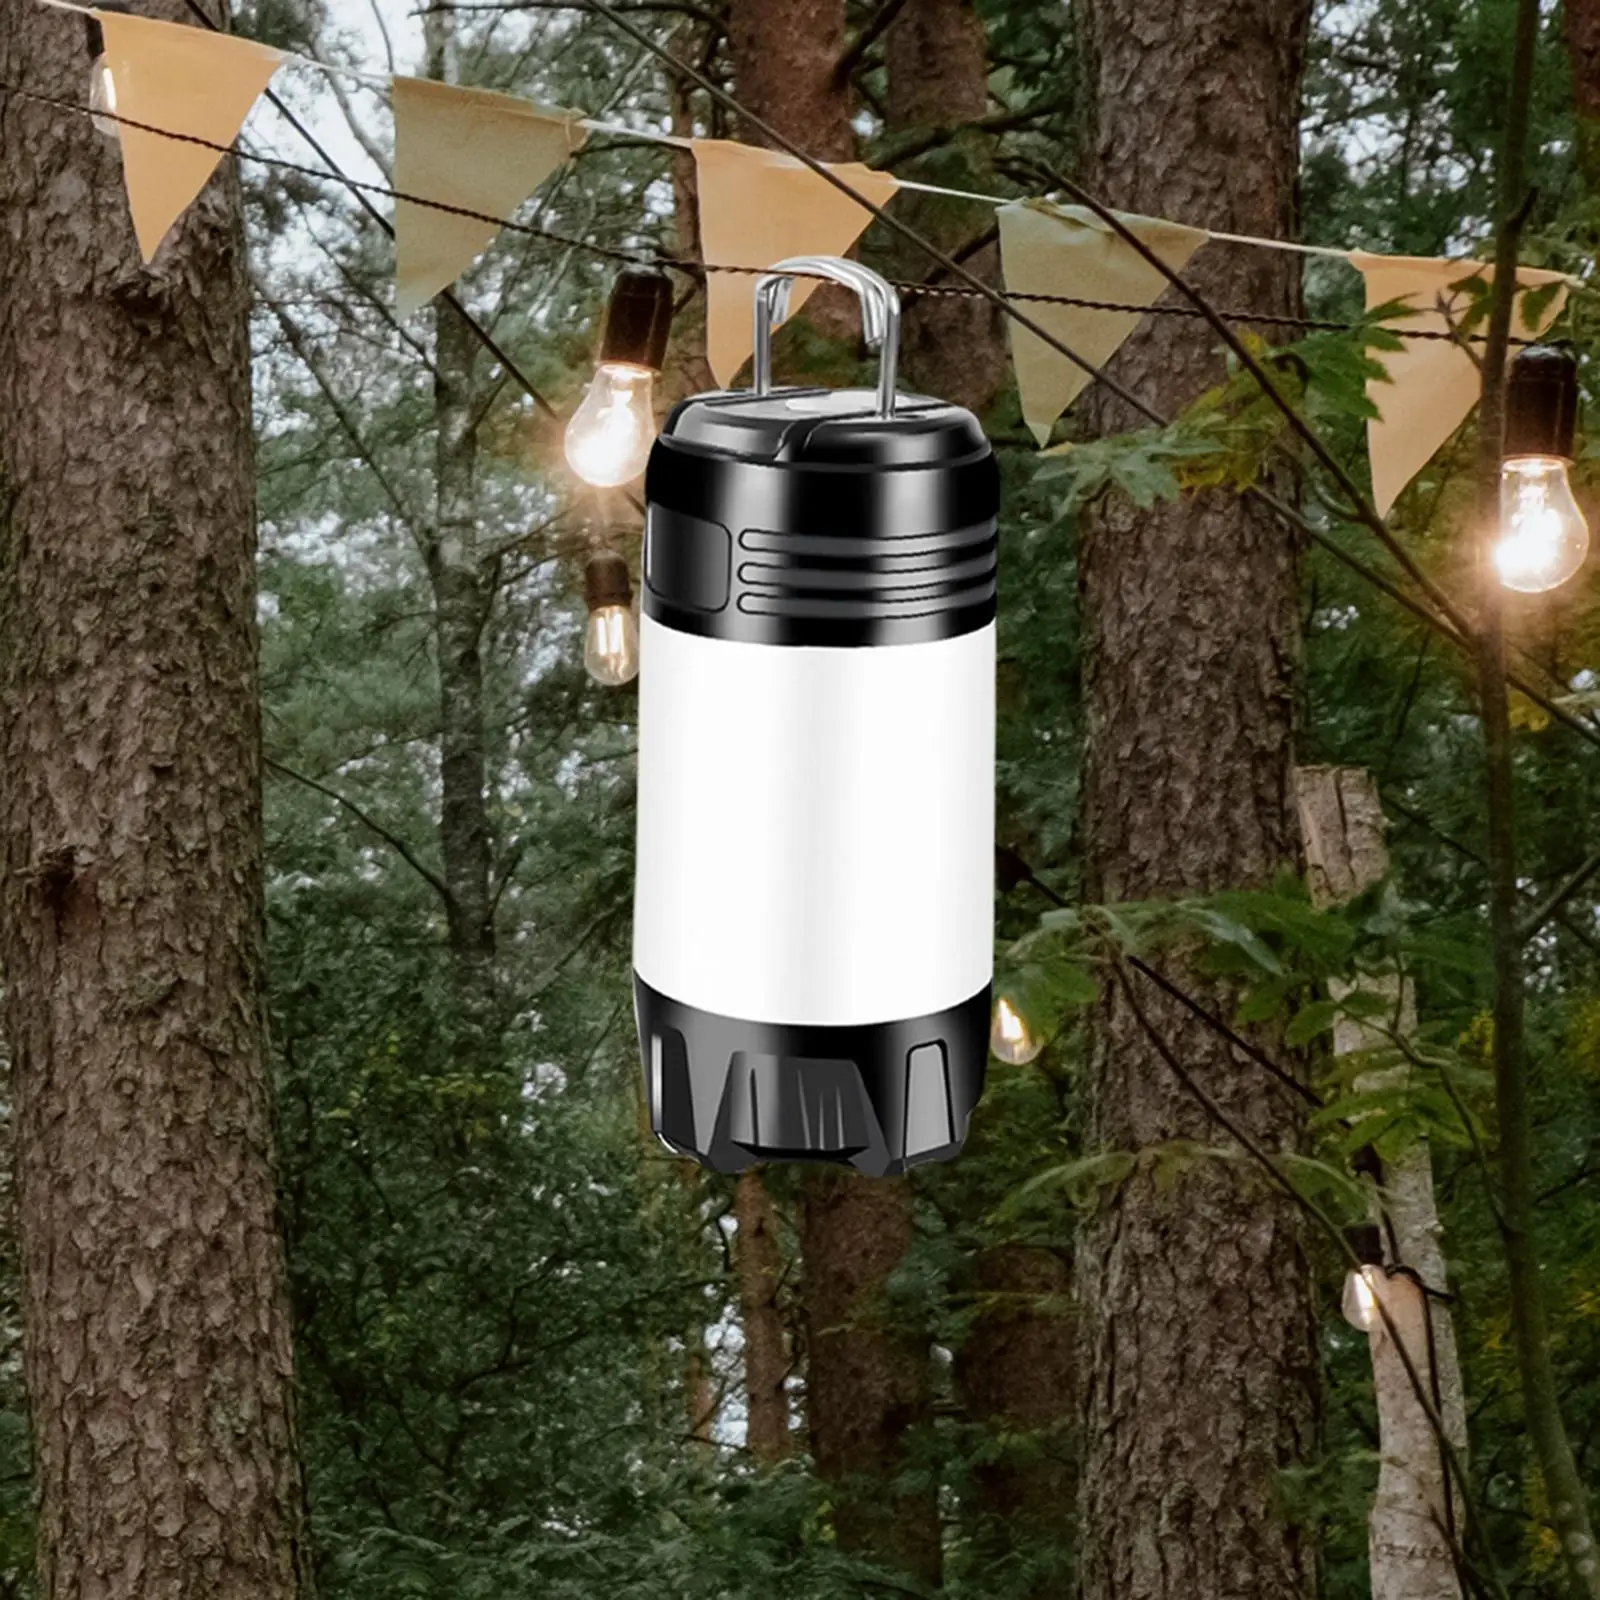 LED Camping Lantern Lamp Headlight Hanging Lights Rechargeable Flashlight for Emergency Outdoor Backpacking Home